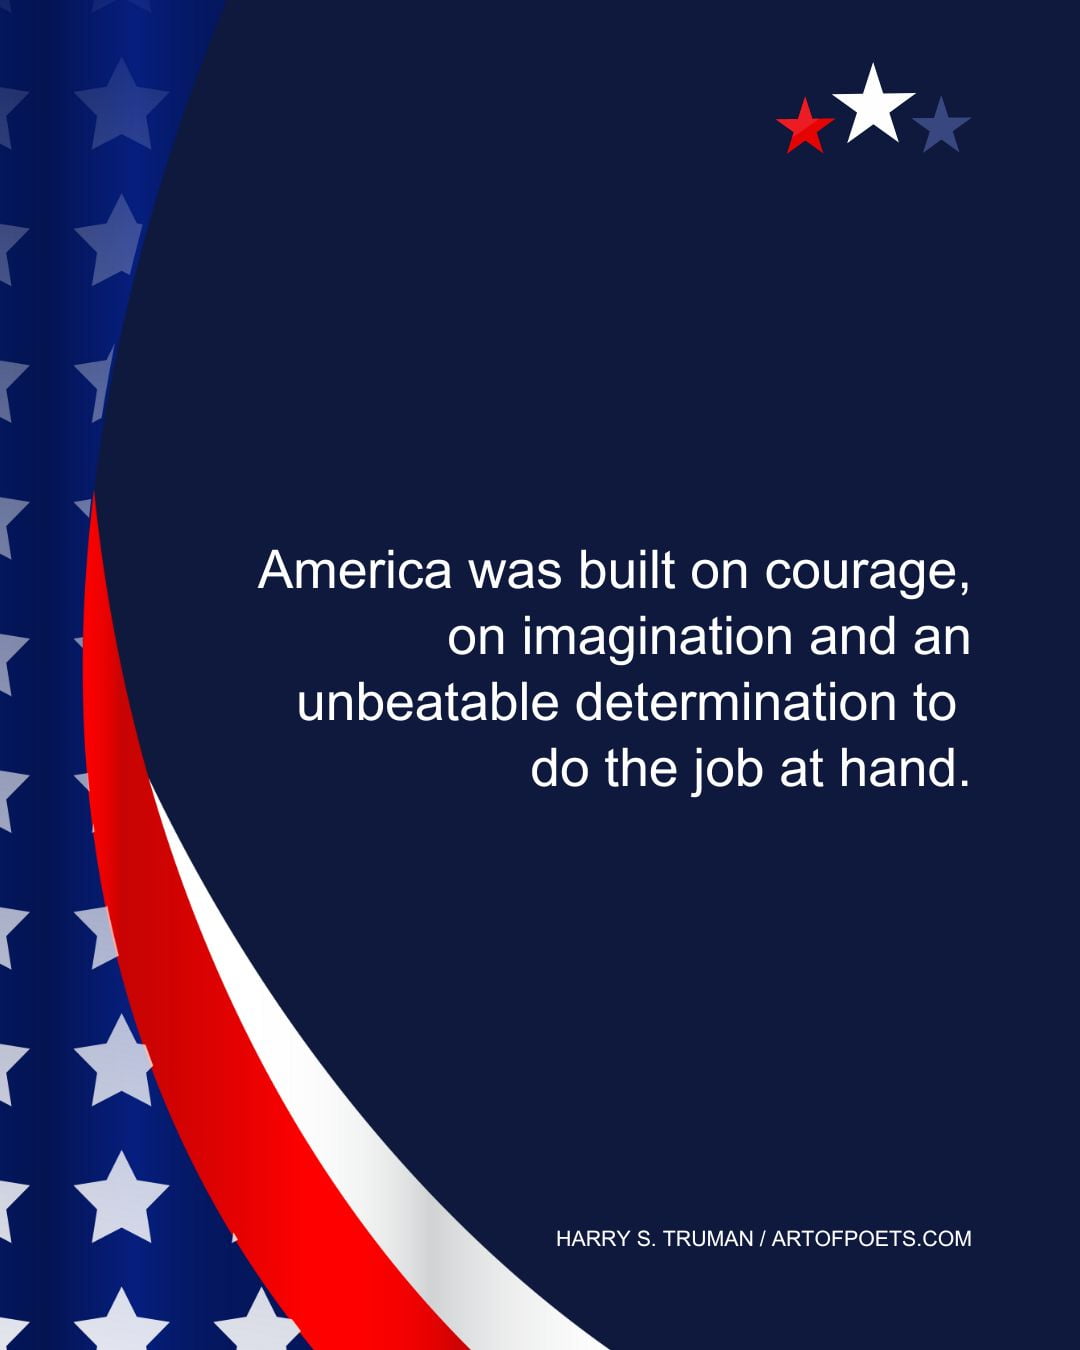 America was built on courage on imagination and an unbeatable determination to do the job at hand